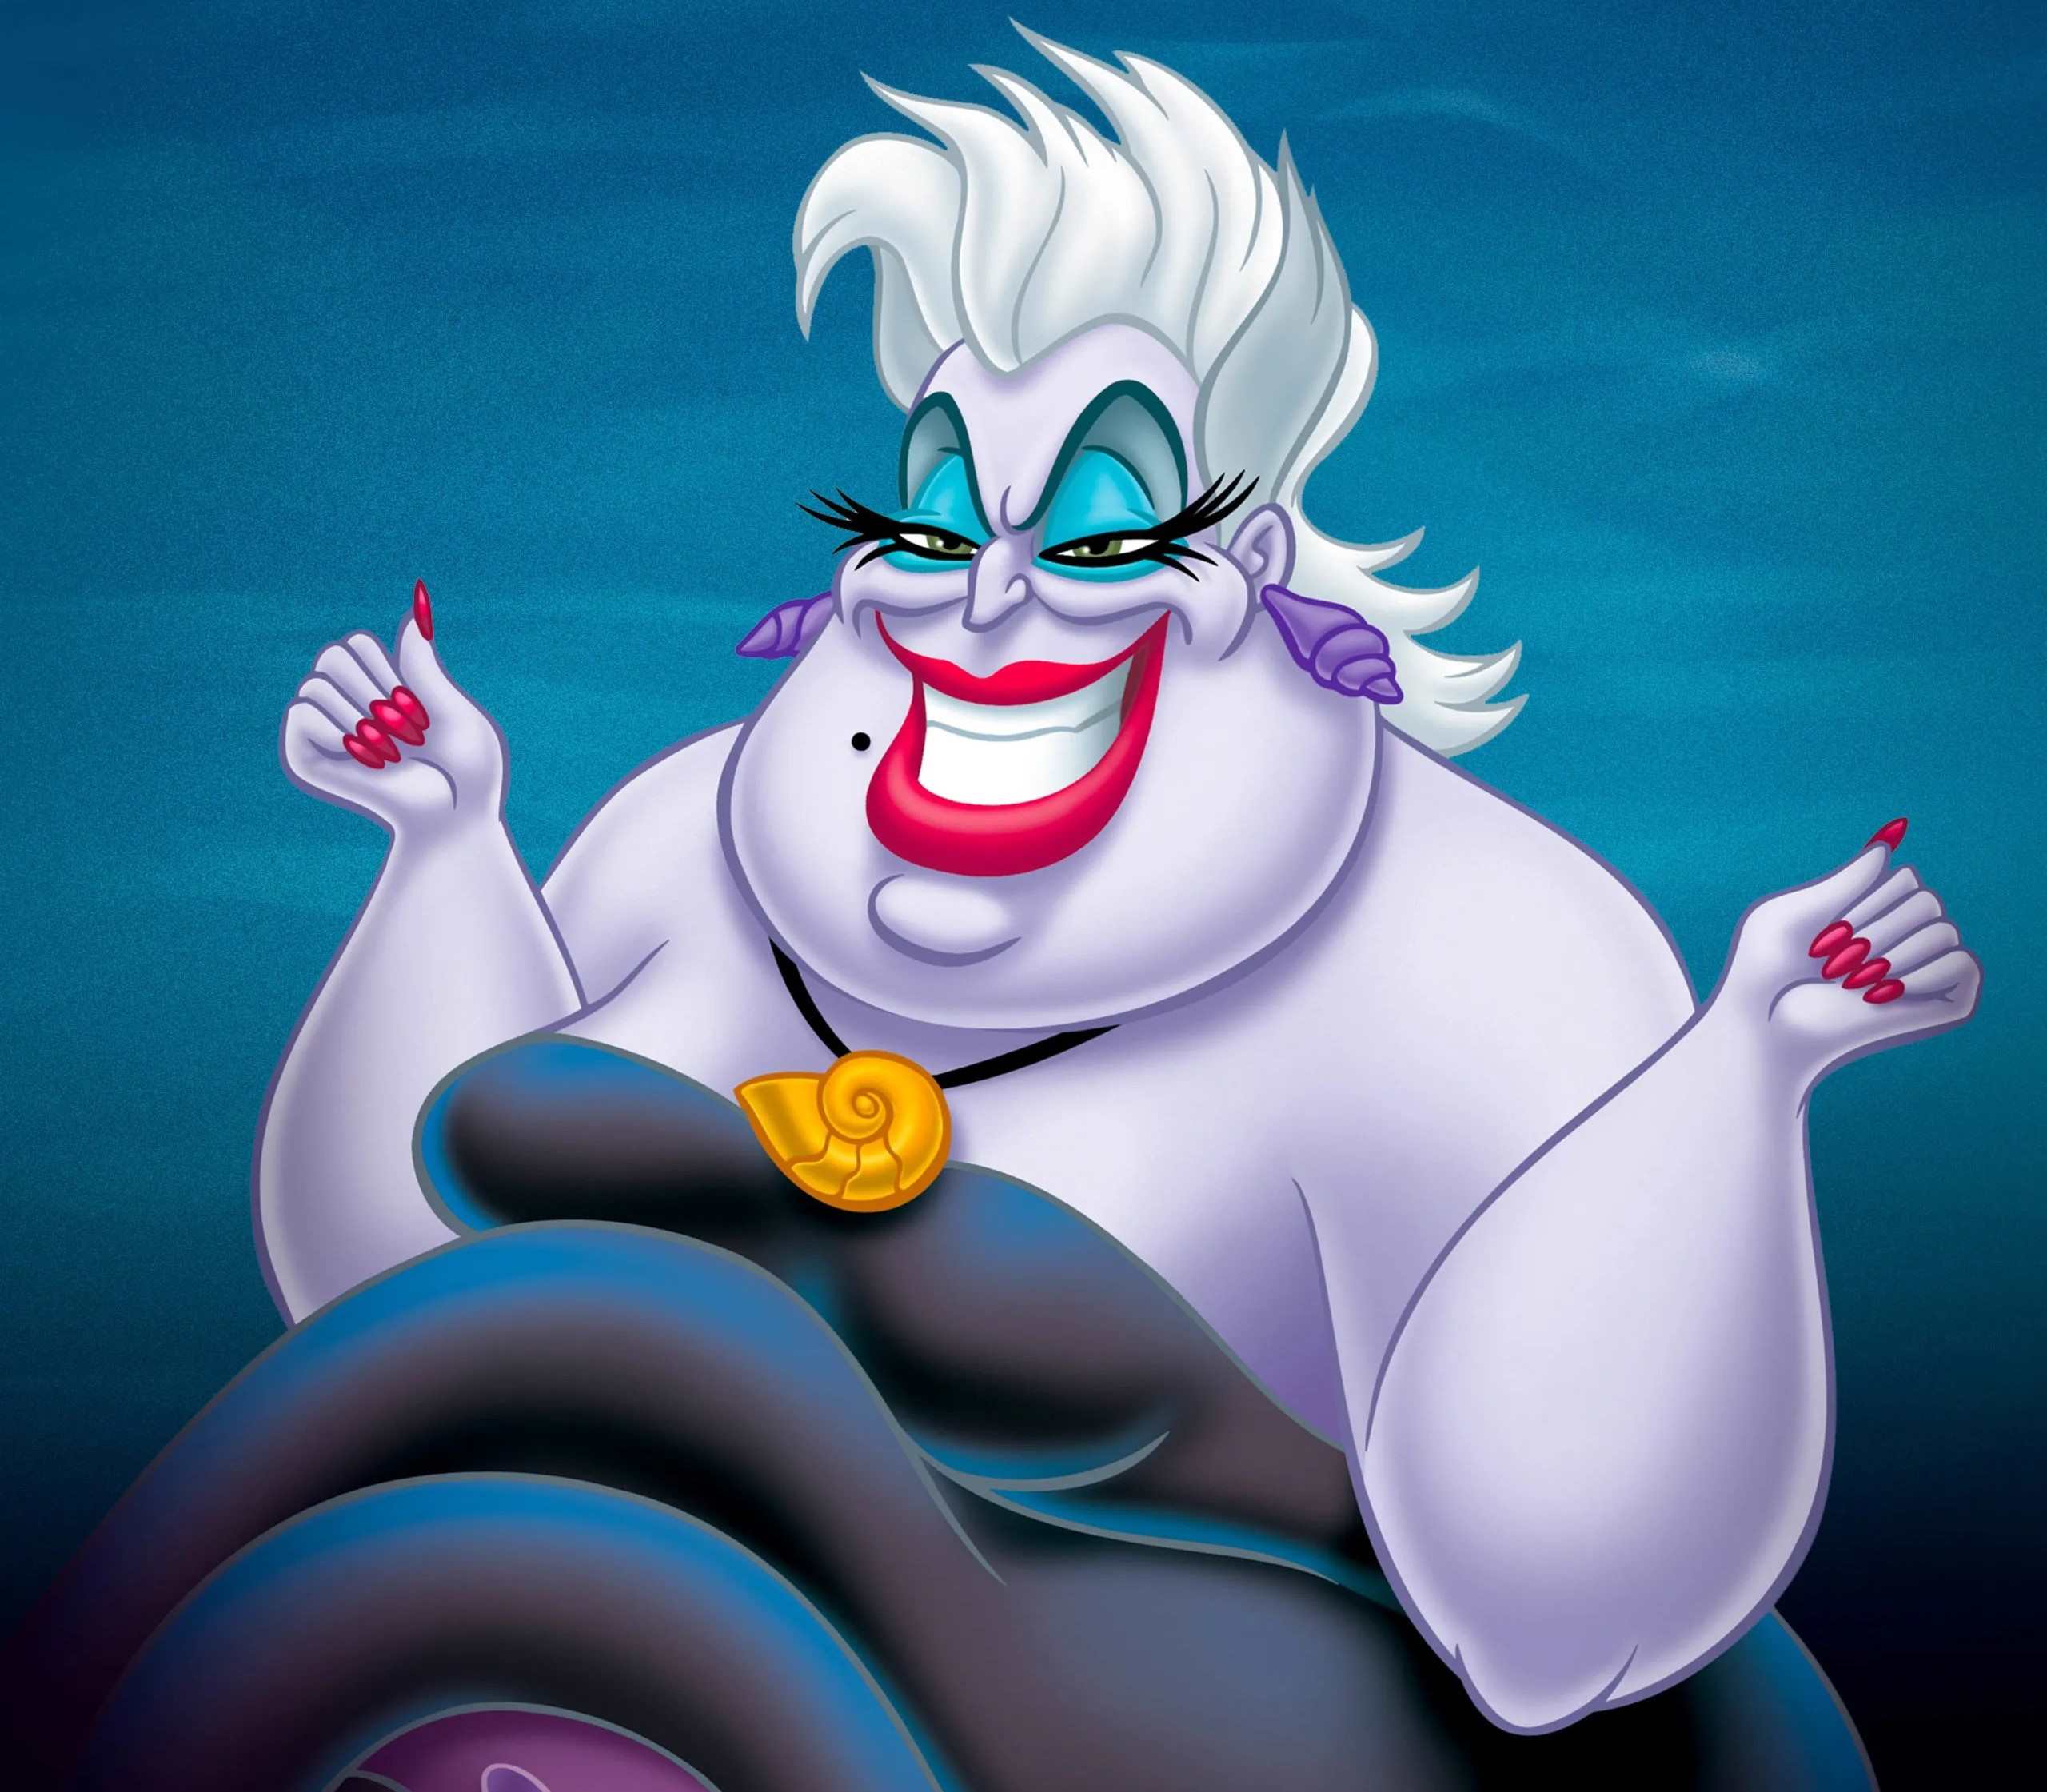 23-facts-about-ursula-the-little-mermaid